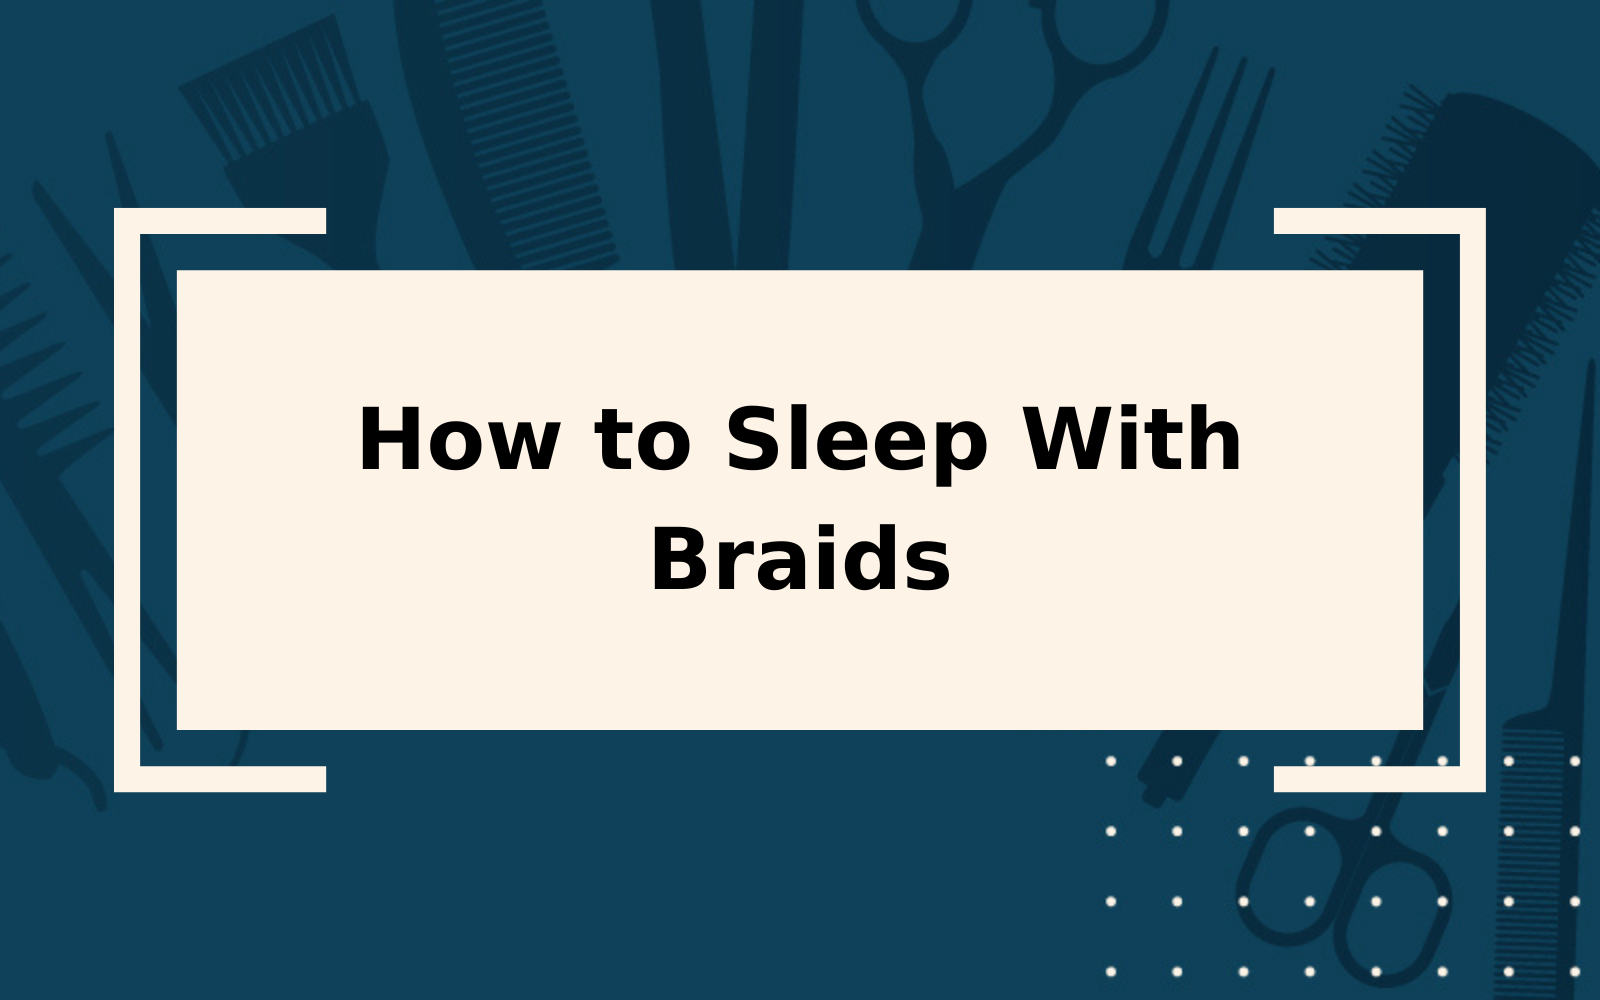 How to Sleep With Braids | Step-by-Step Guide